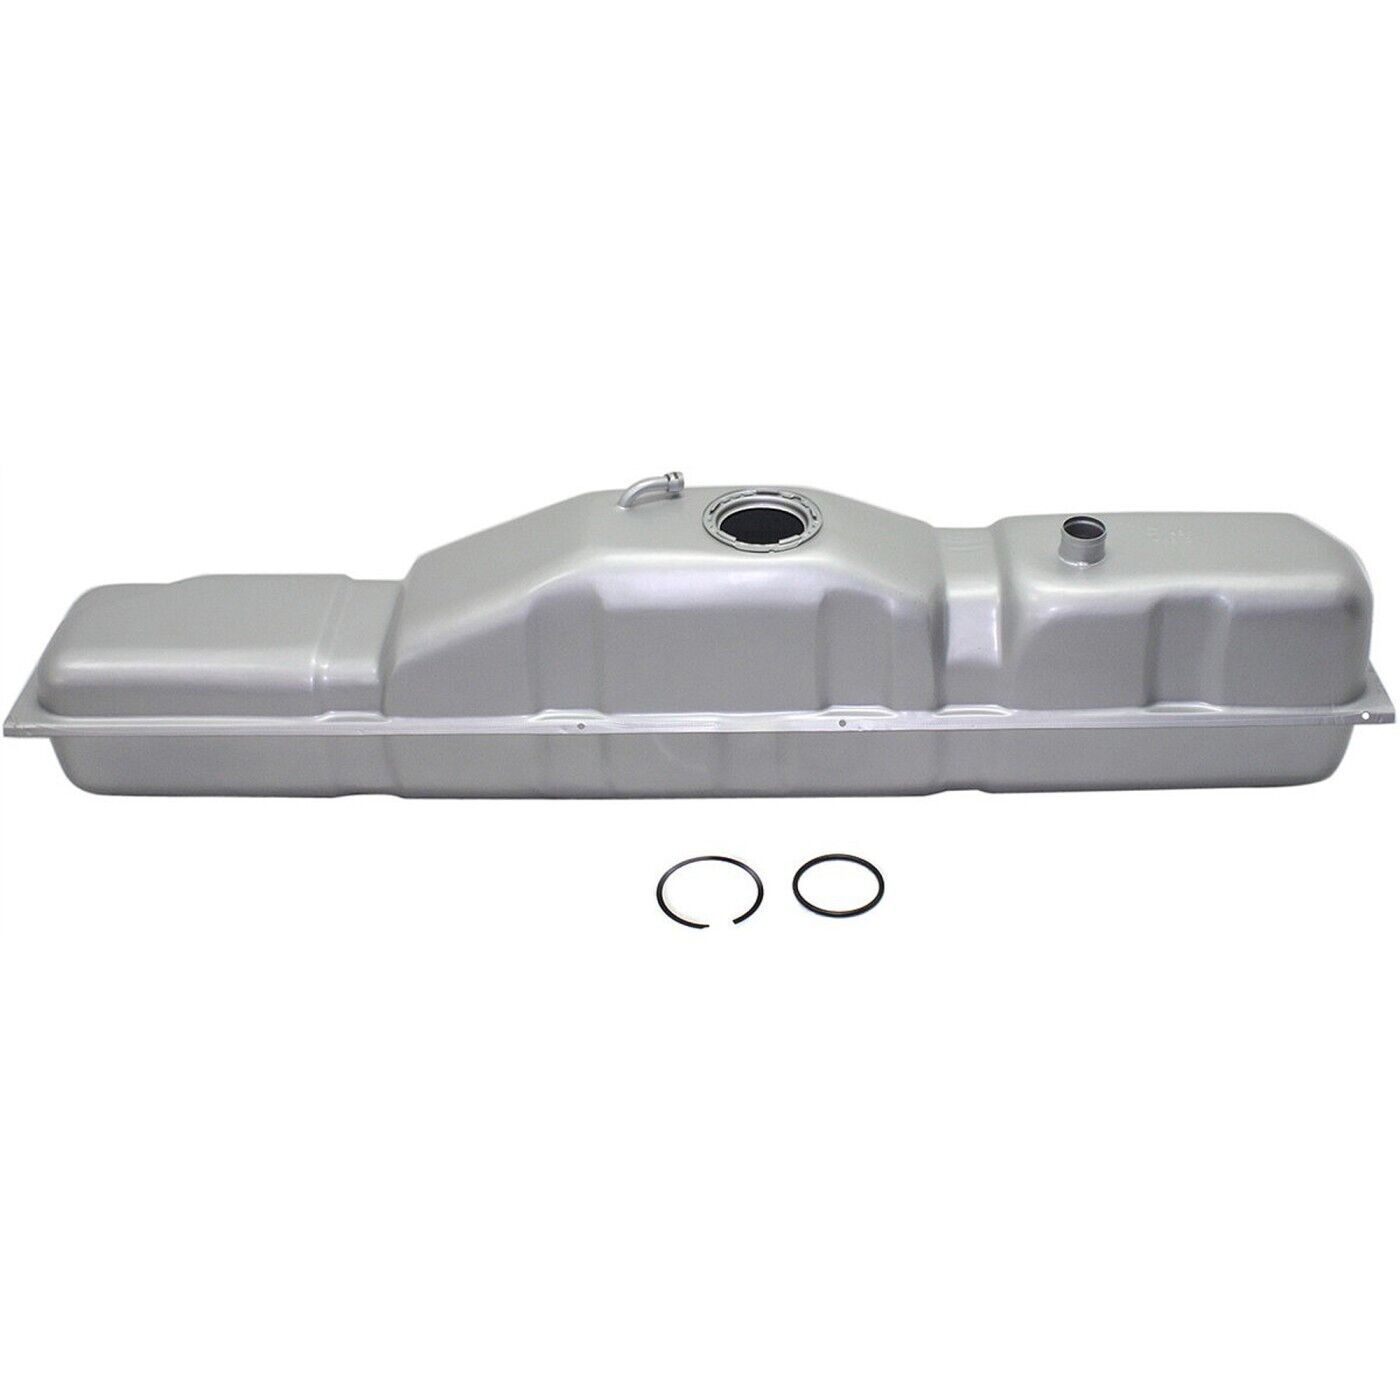 22 Gallon Fuel Gas Tank For 1998-2000 Chevrolet C3500 K3500 GMC Cab and Chassis